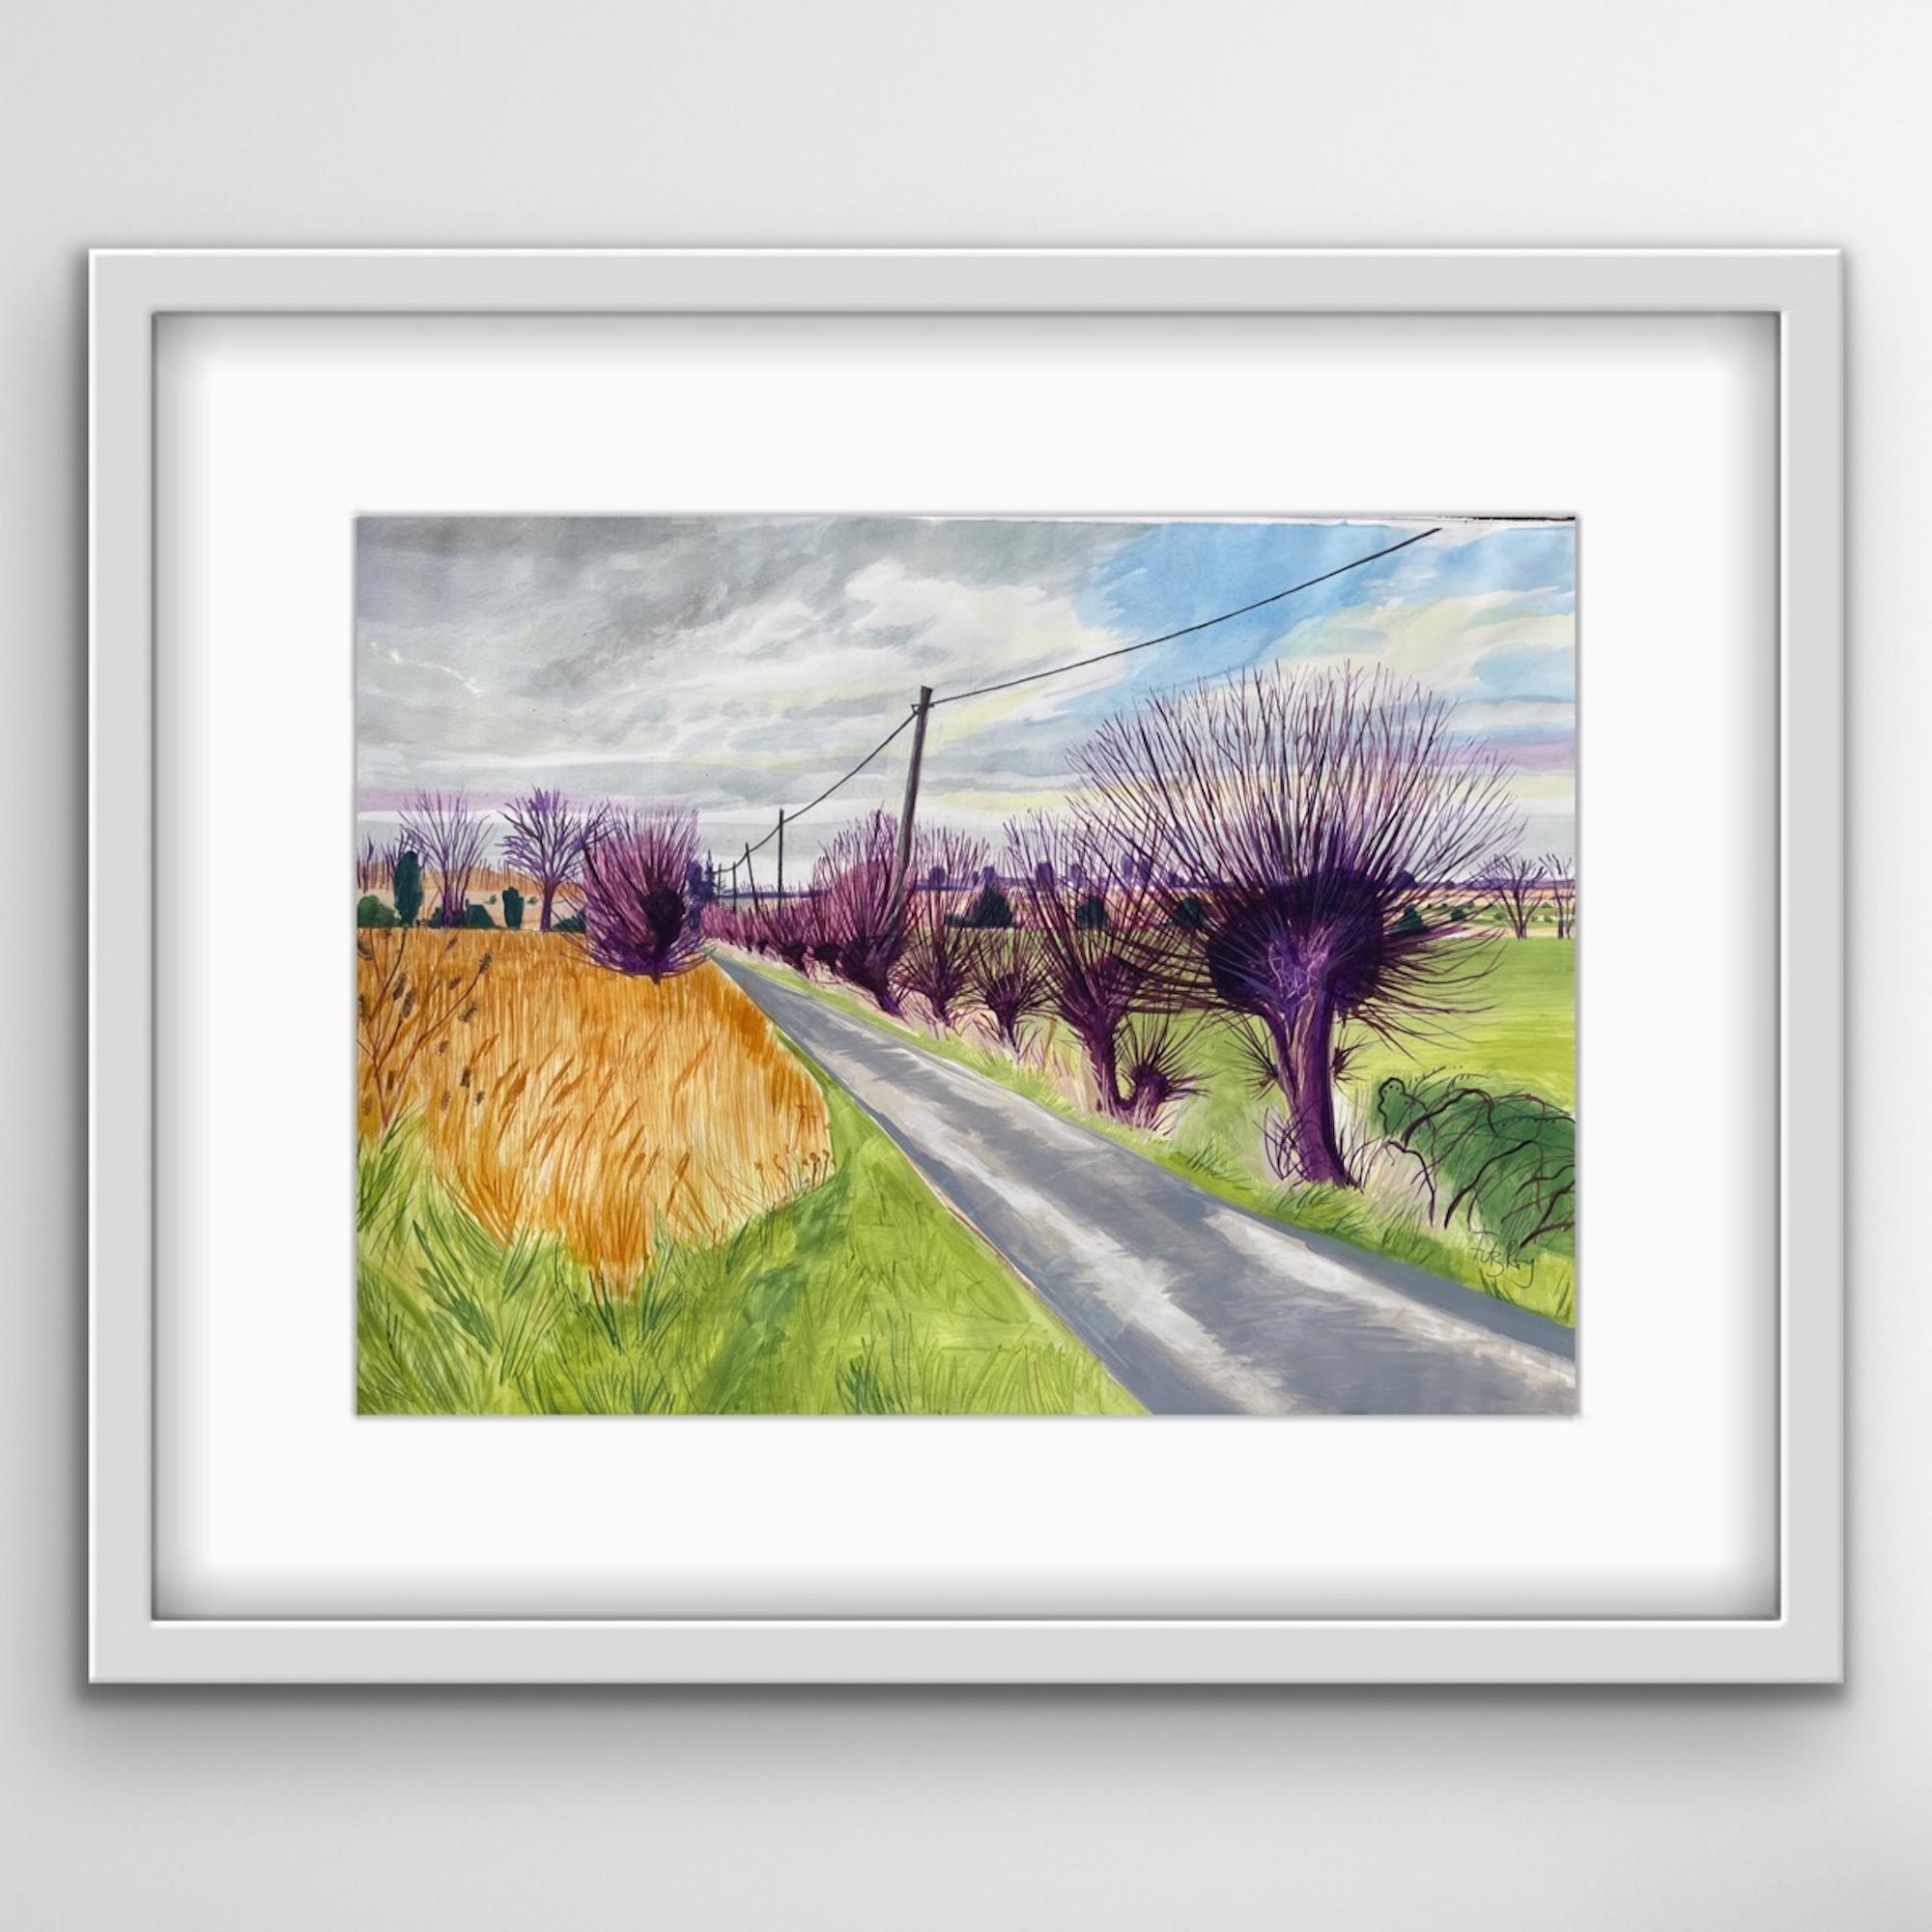 Road to Reedham is an original work on paper by Cornelia Fitzroy. Cornelia FitzRoy ​is a Norfolk landscape plein air artist who uses colour and distinctive shapes to show her local scapes. Often returning to the same places Cornelia captures what is